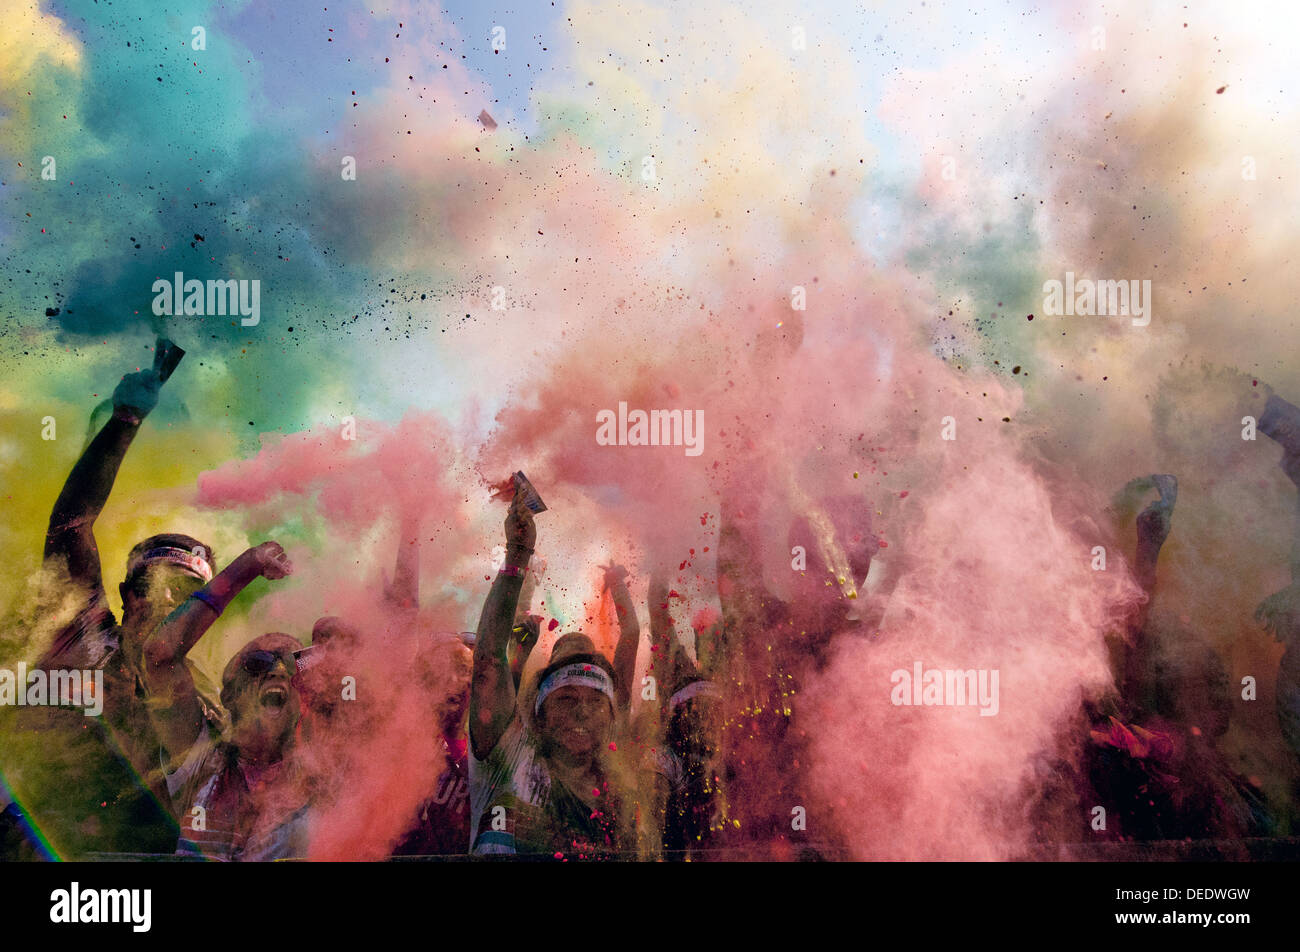 Runners are sprayed with colored powder during The Color Run September 7, 2013 in Wichita Falls, Texas. The Color Run is a fun 5K race where participants are sprayed with colorful powders. Stock Photo